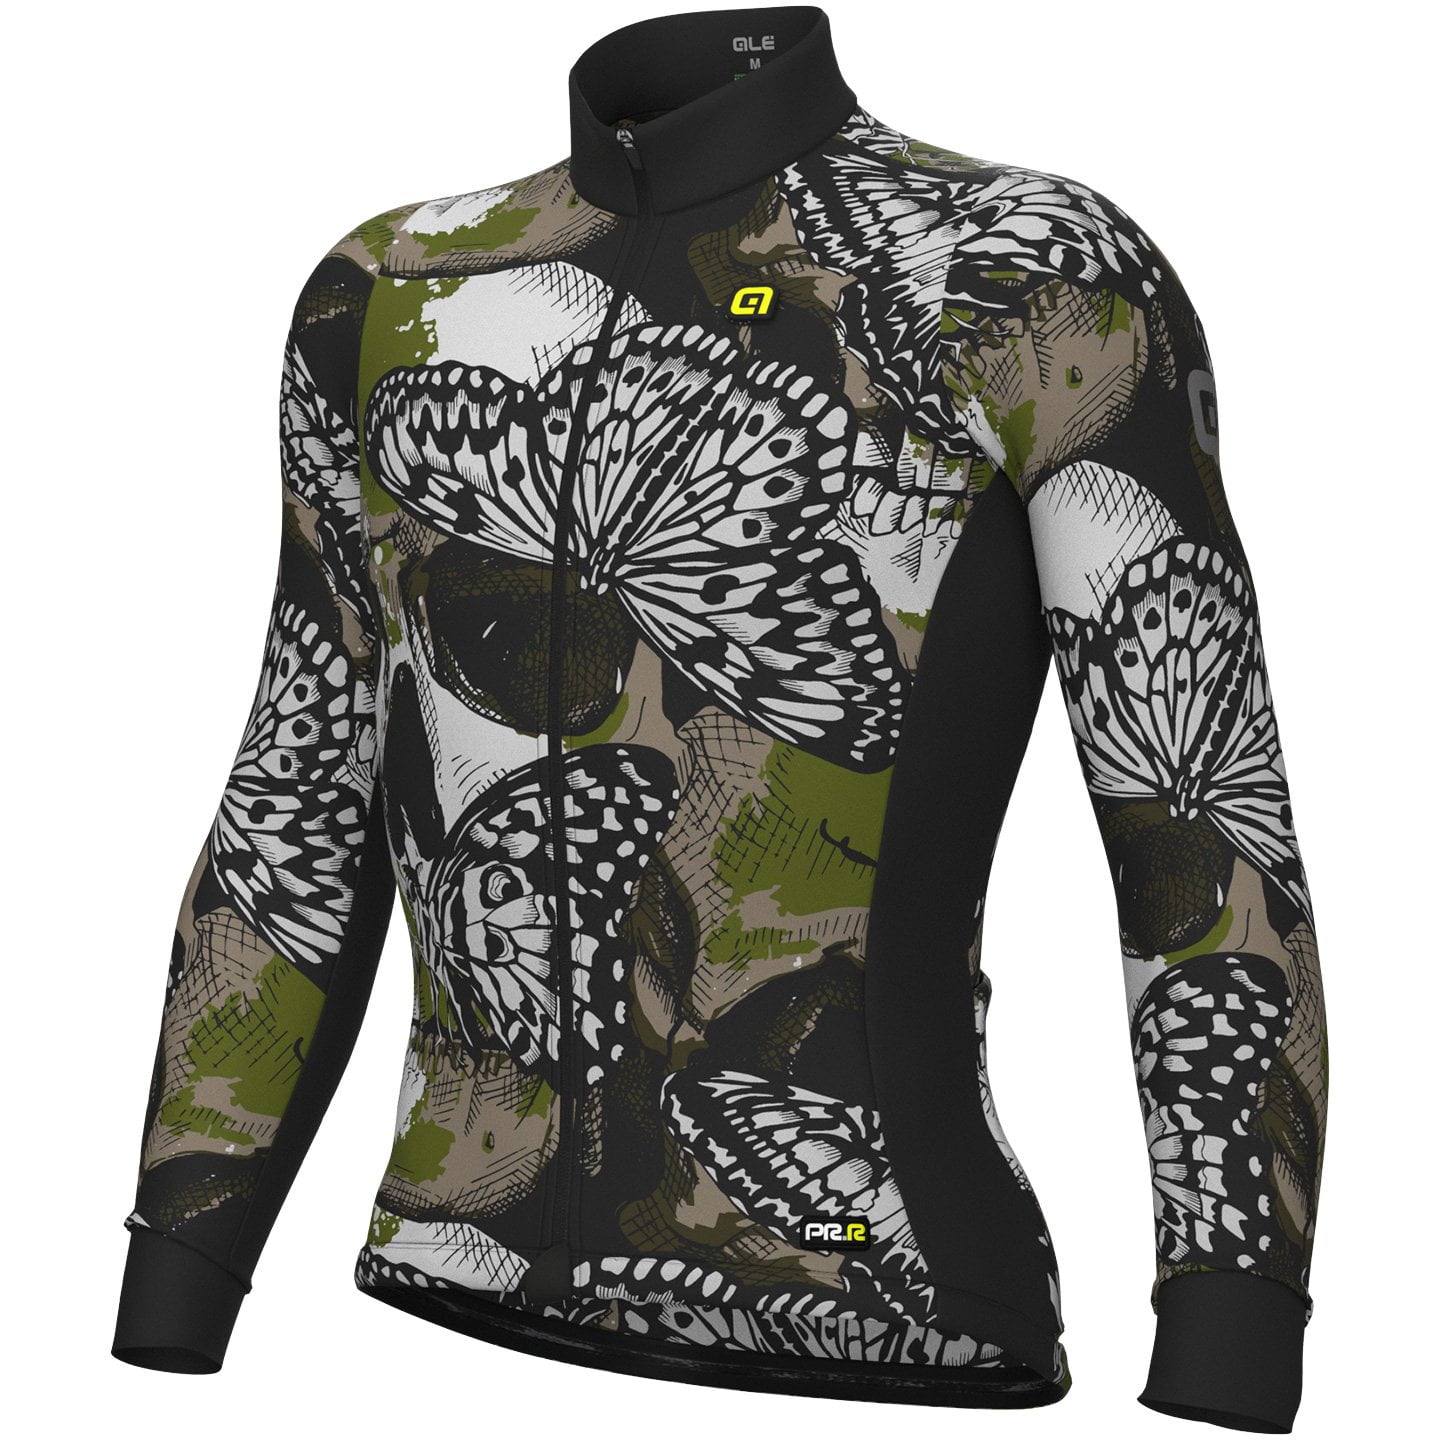 ALE Falena Long Sleeve Jersey Long Sleeve Jersey, for men, size M, Cycling jersey, Cycling clothing